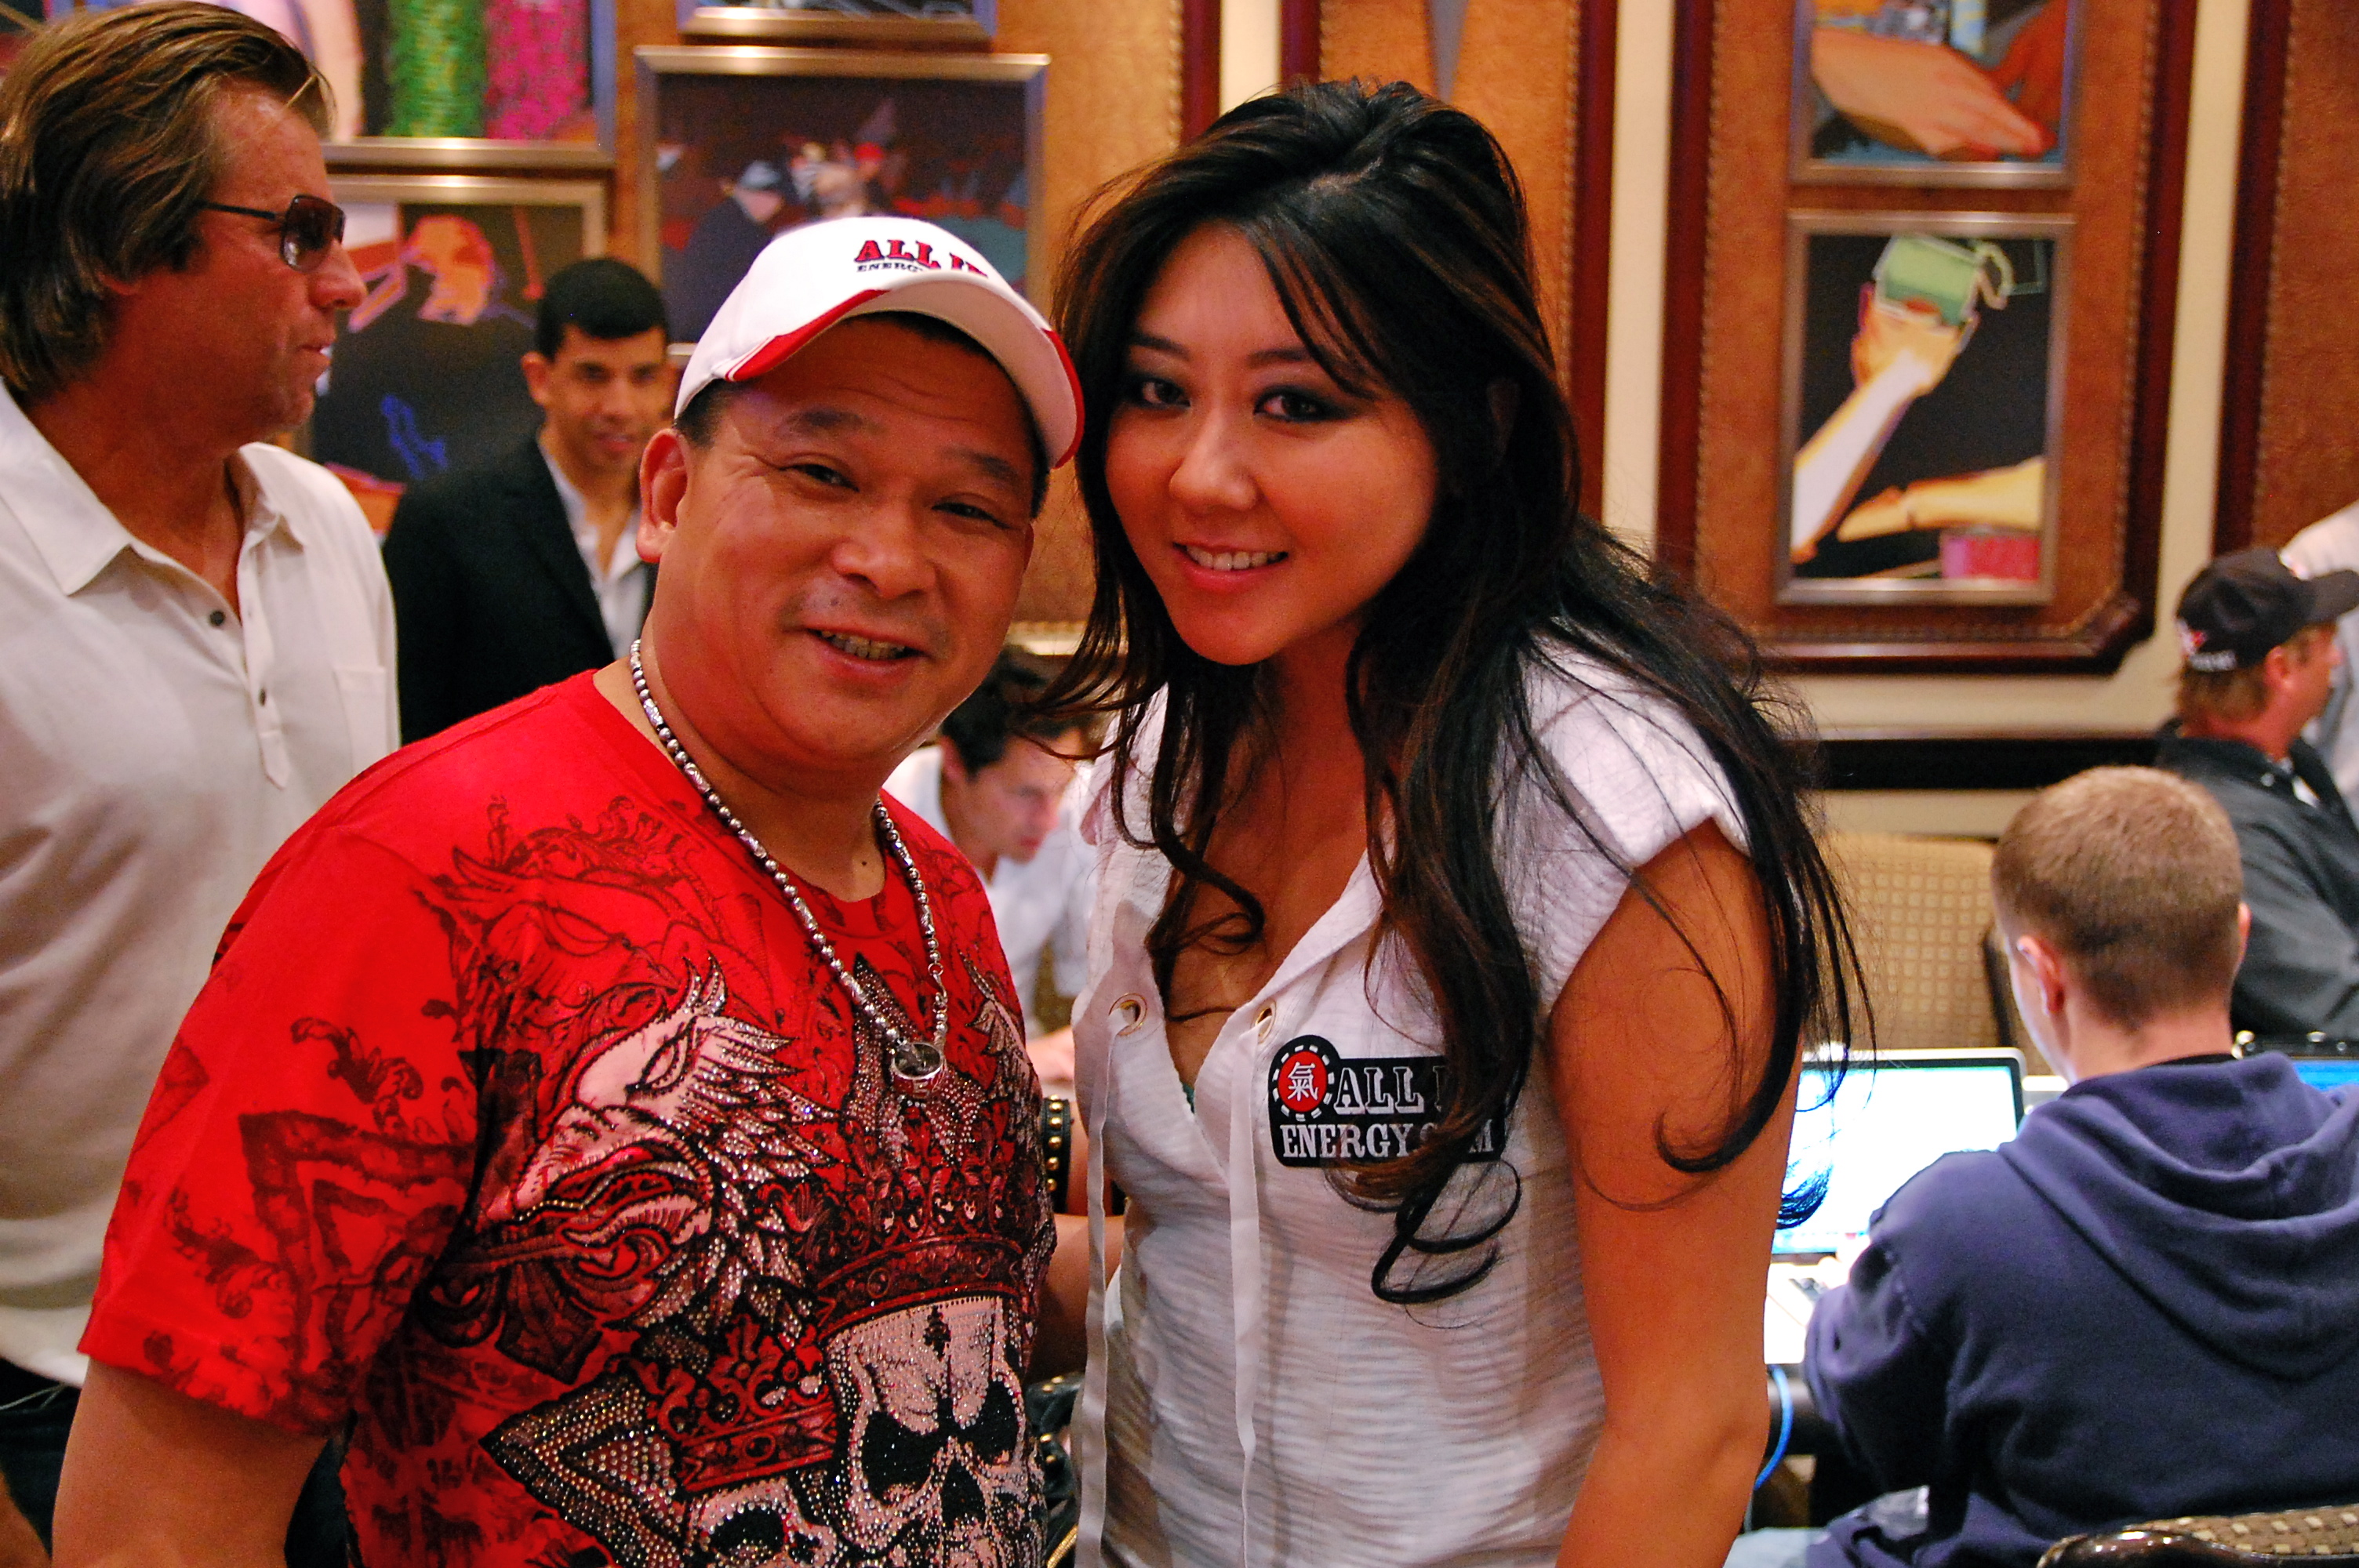 Poker stars, Maria Ho and Johnny Chan at the World Poker Tour's Bellagio Cup in Las Vegas.